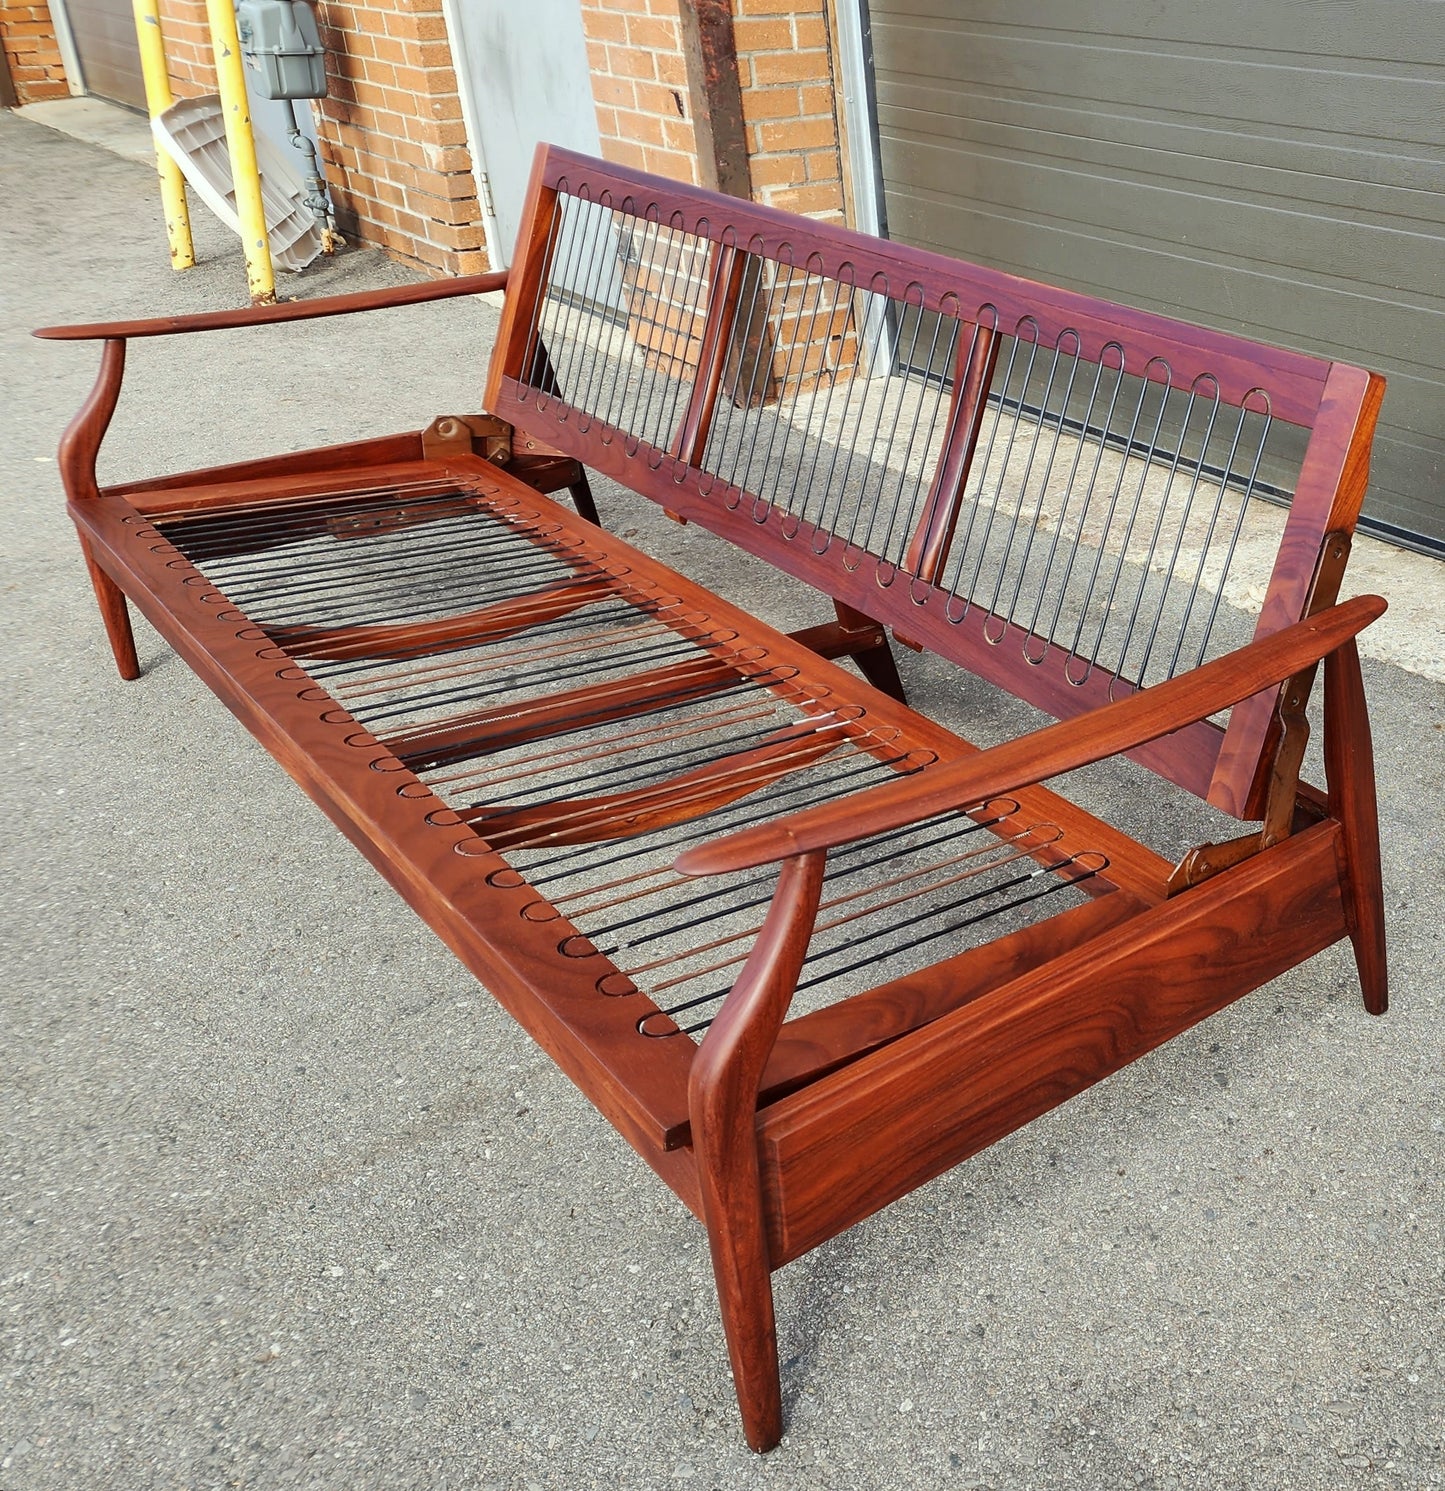 REFINISHED Mid Century Modern Solid Teak Sofa - Bed will get NEW CUSHIONS